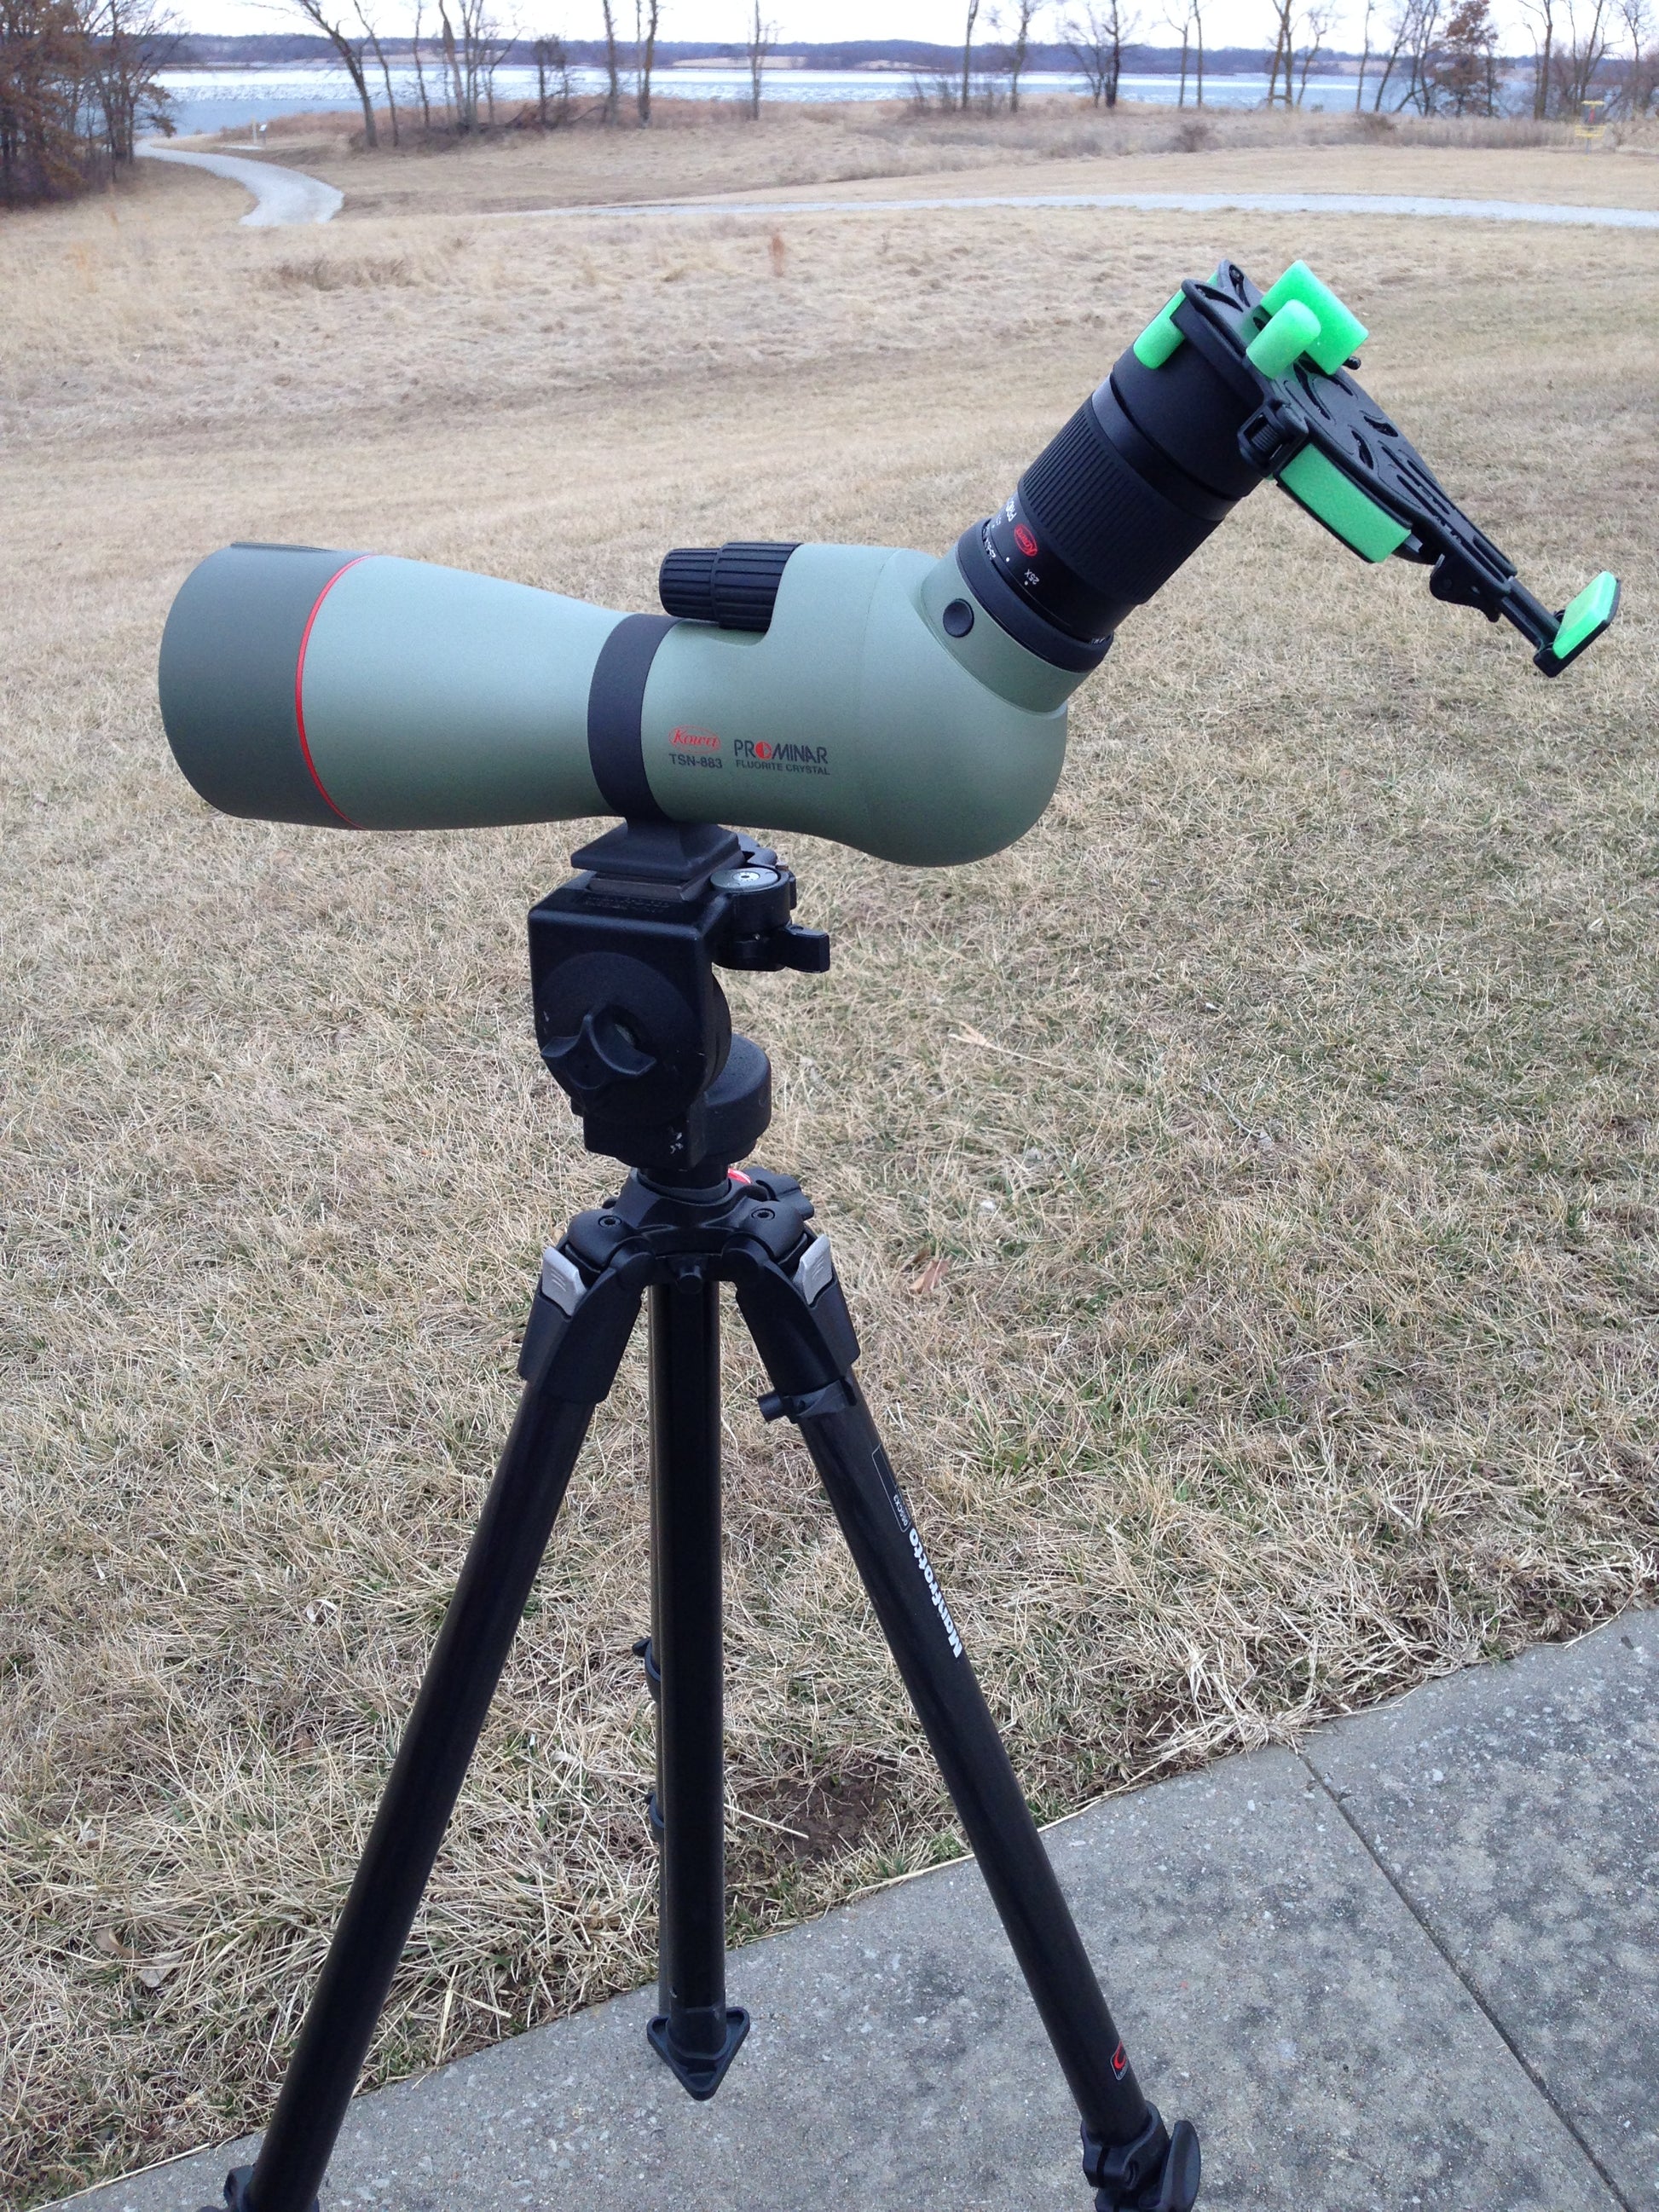 Green spotting scope with Digiscoping adapter and phone attached